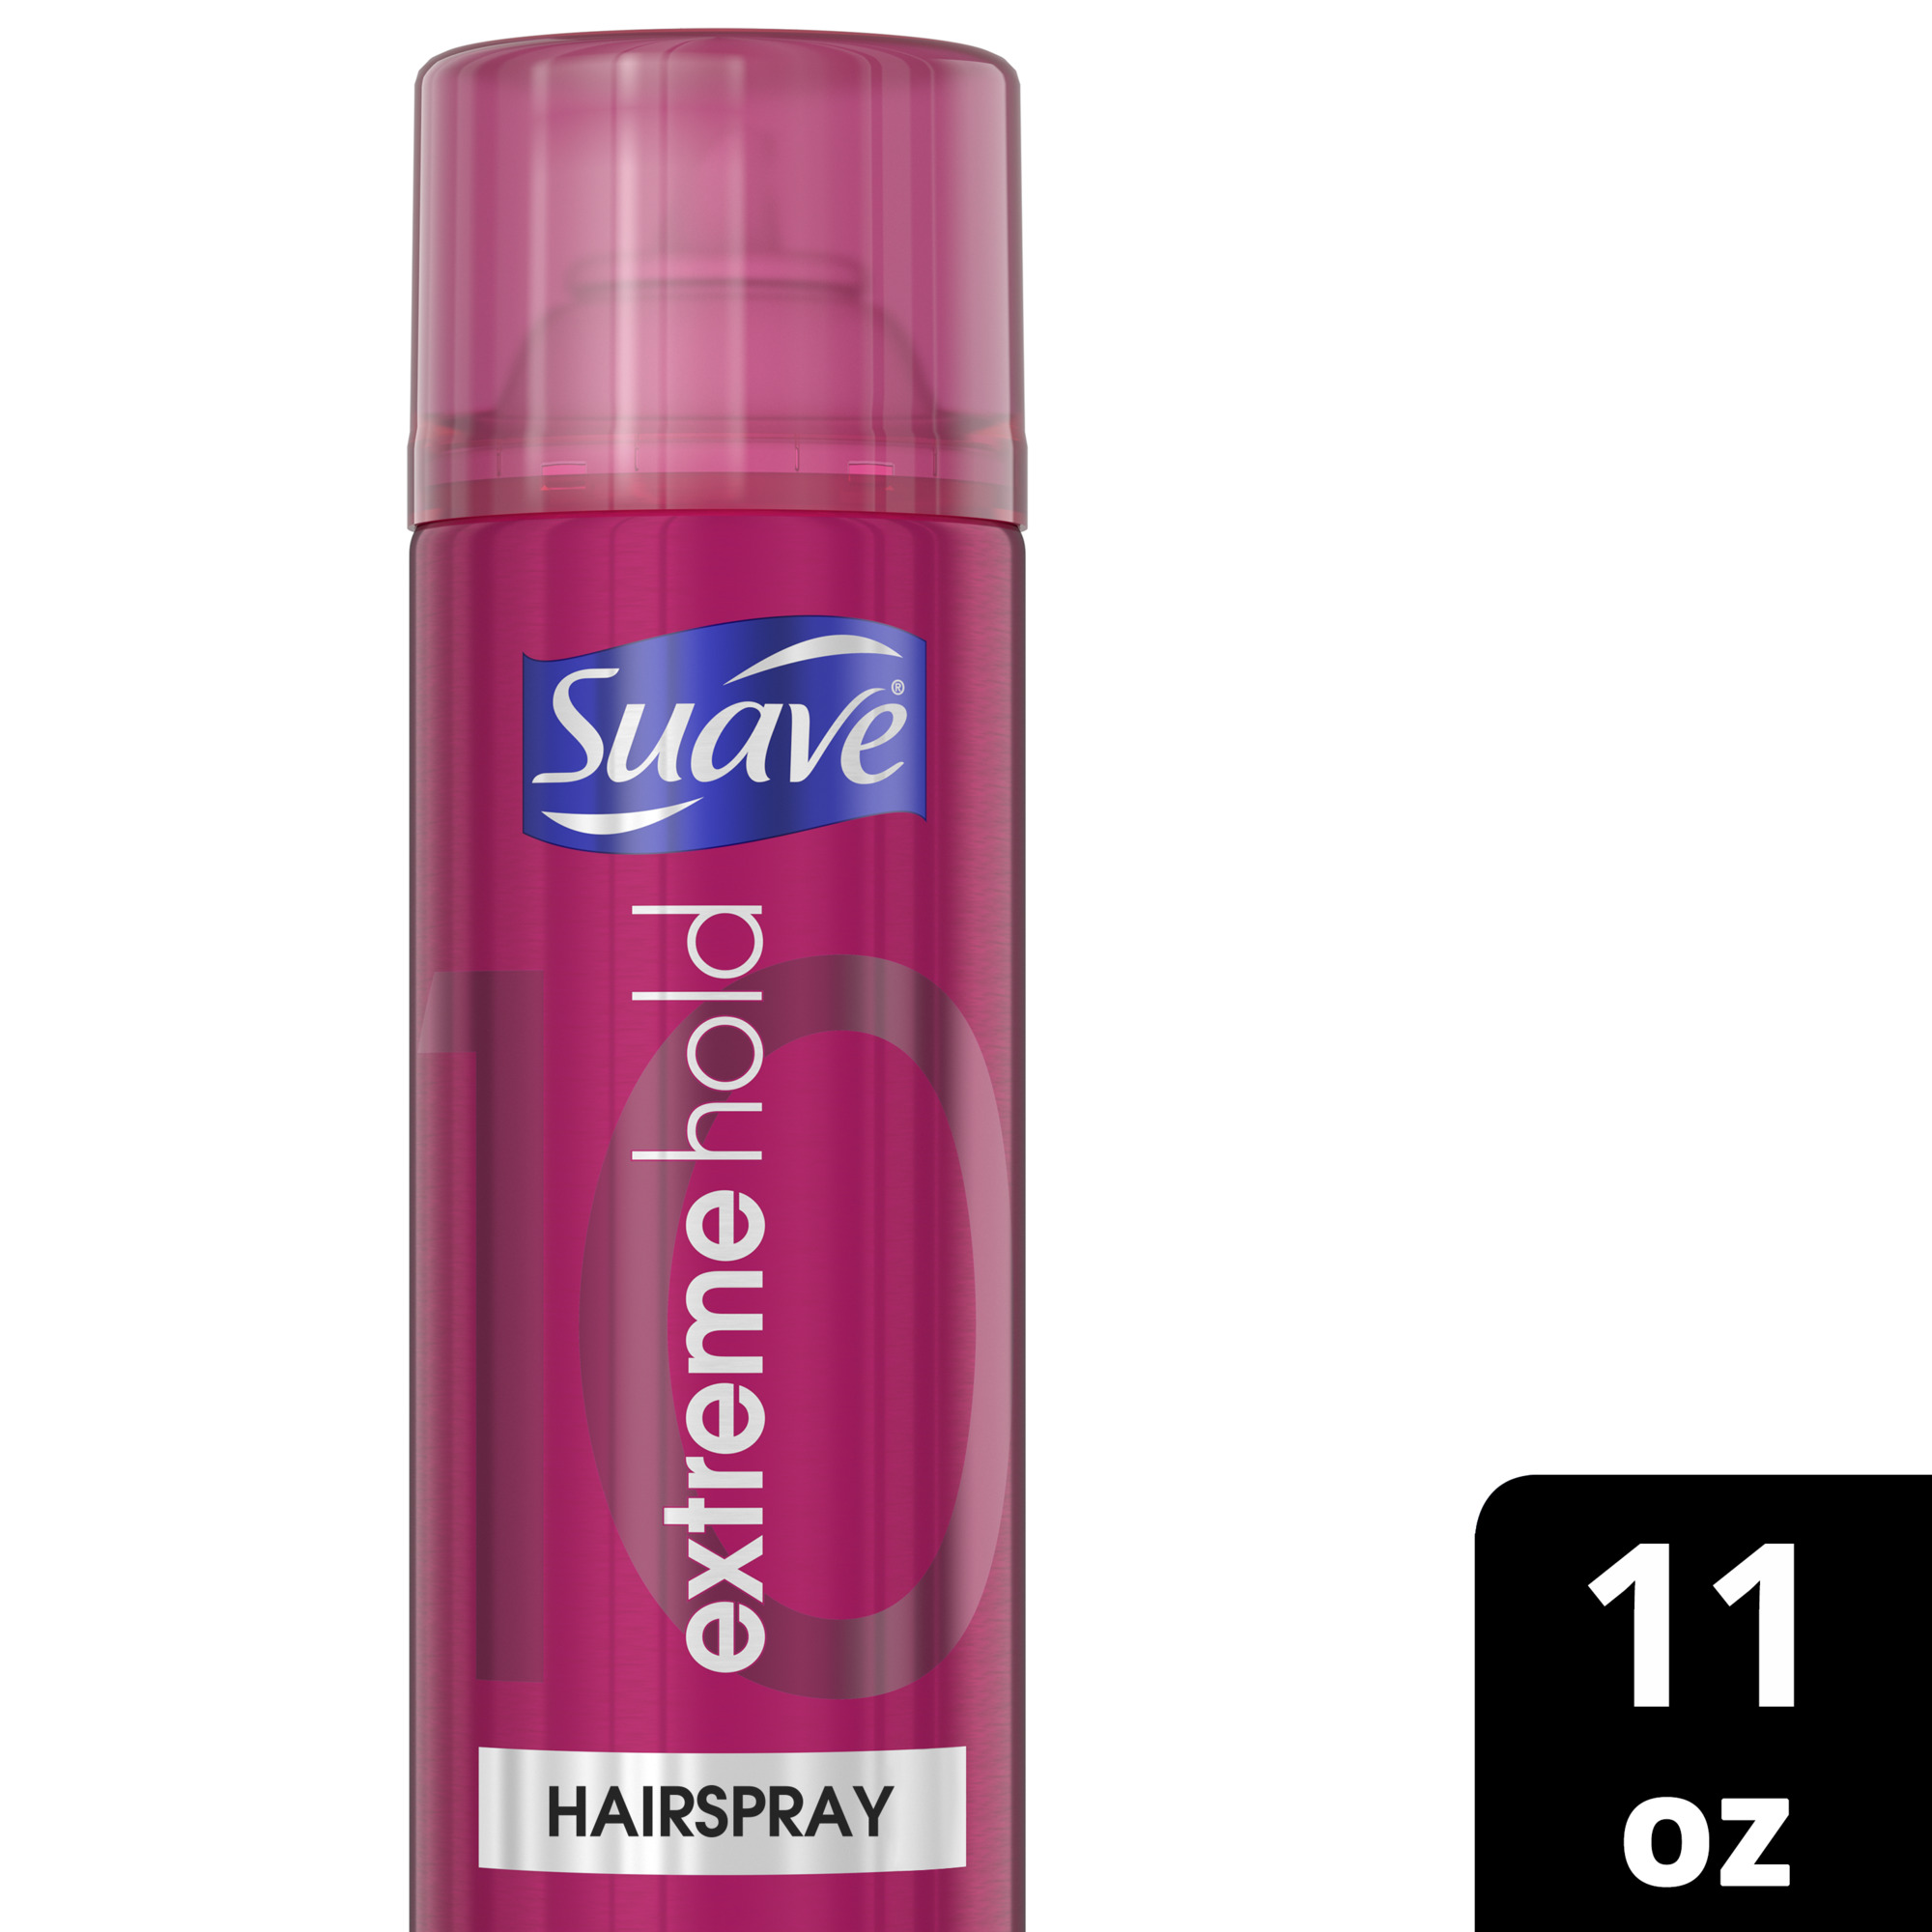 Suave Hairspray Extreme Hold Hair Styling Product 11 oz - image 1 of 8